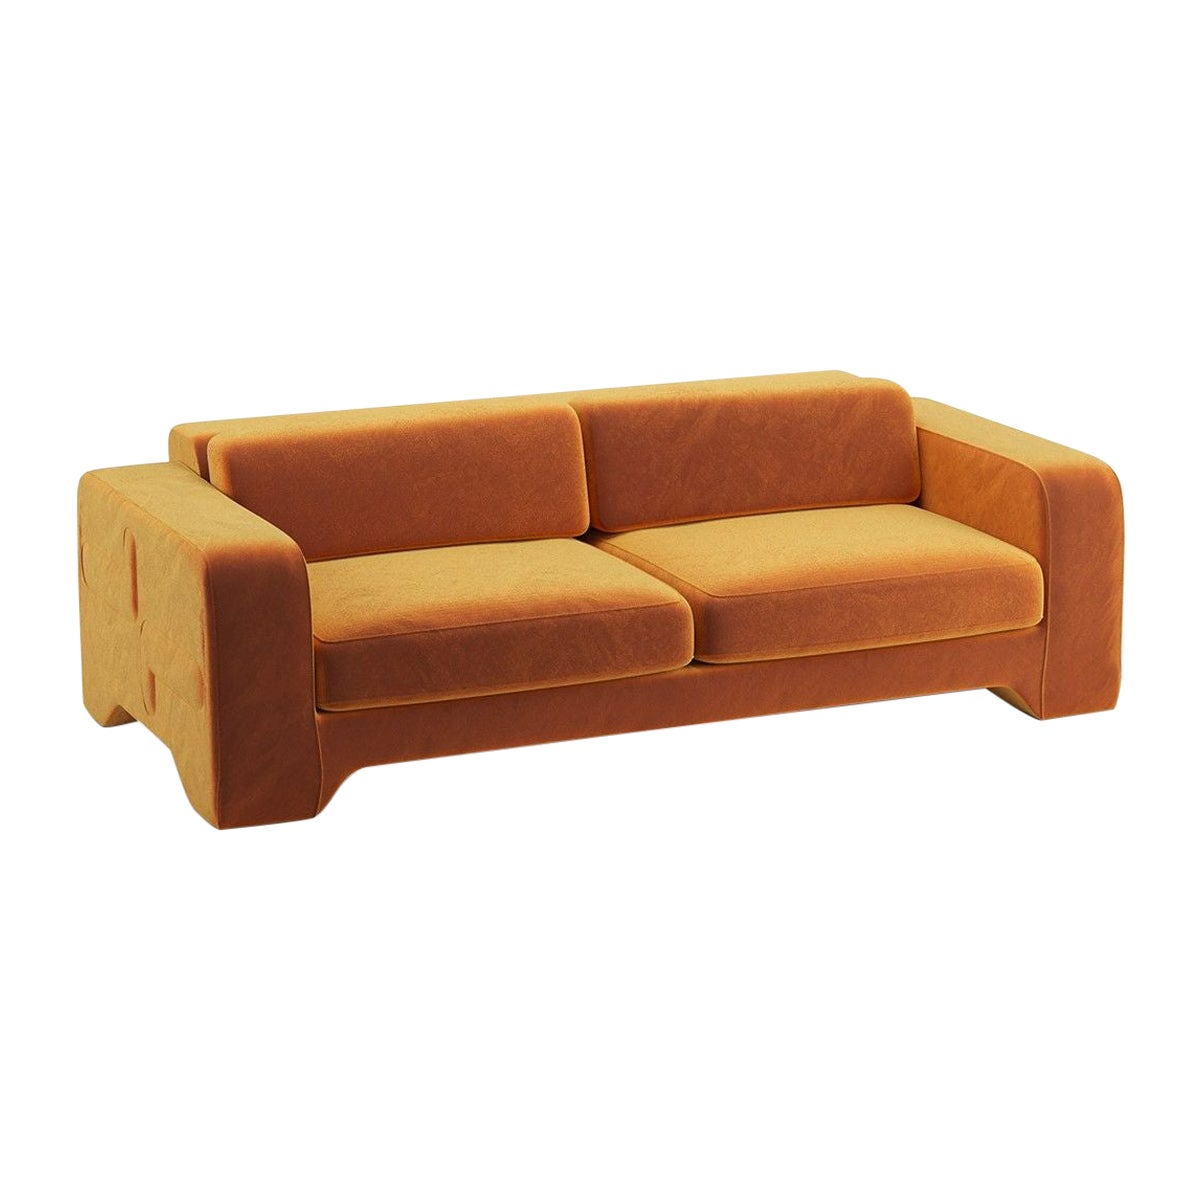 Popus Editions Giovanna 4 Seater Sofa in Cognac Como Velvet Upholstery For Sale